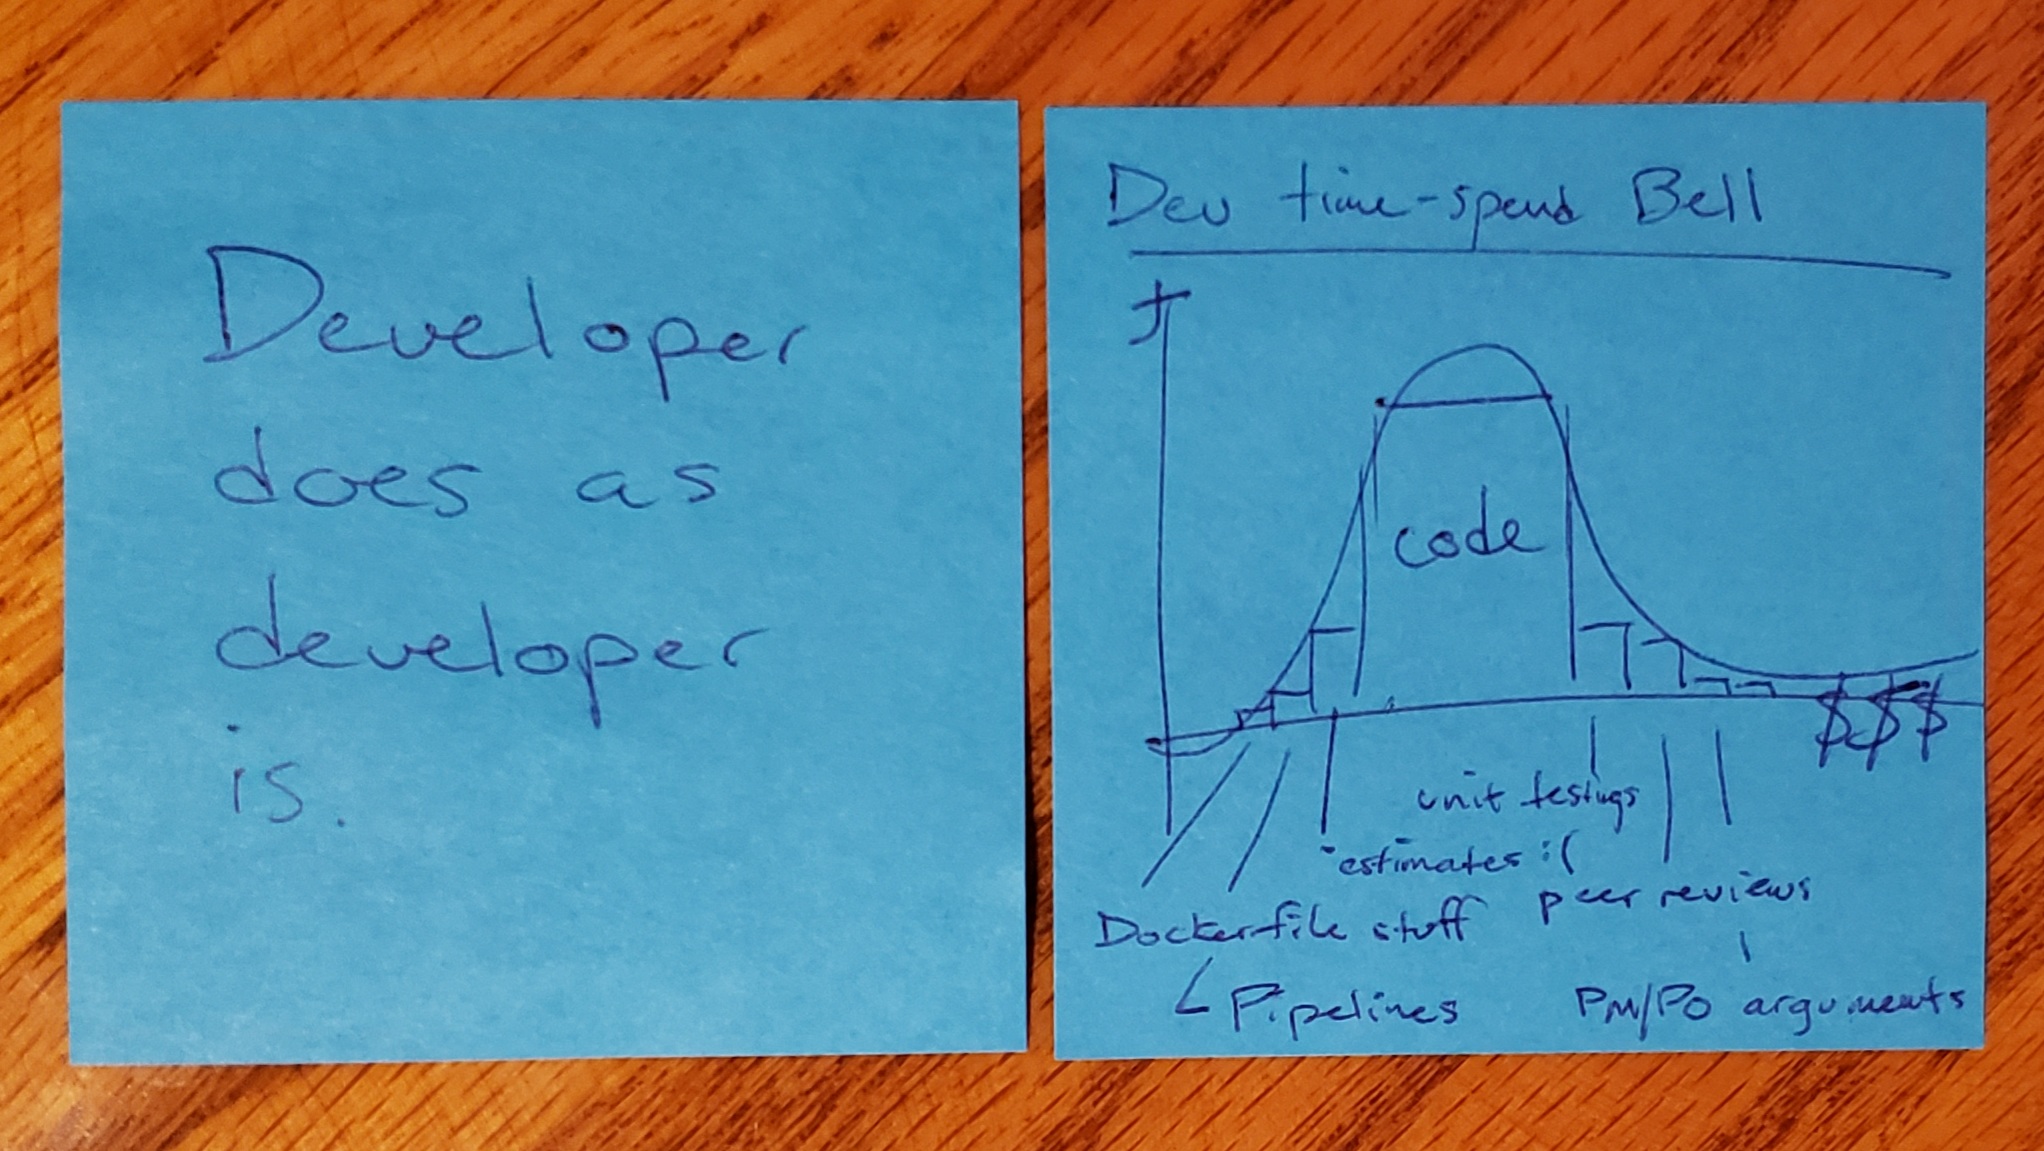 'A developer does as a developer is': 80% of time is spent coding and 20% on everything else less comfortable